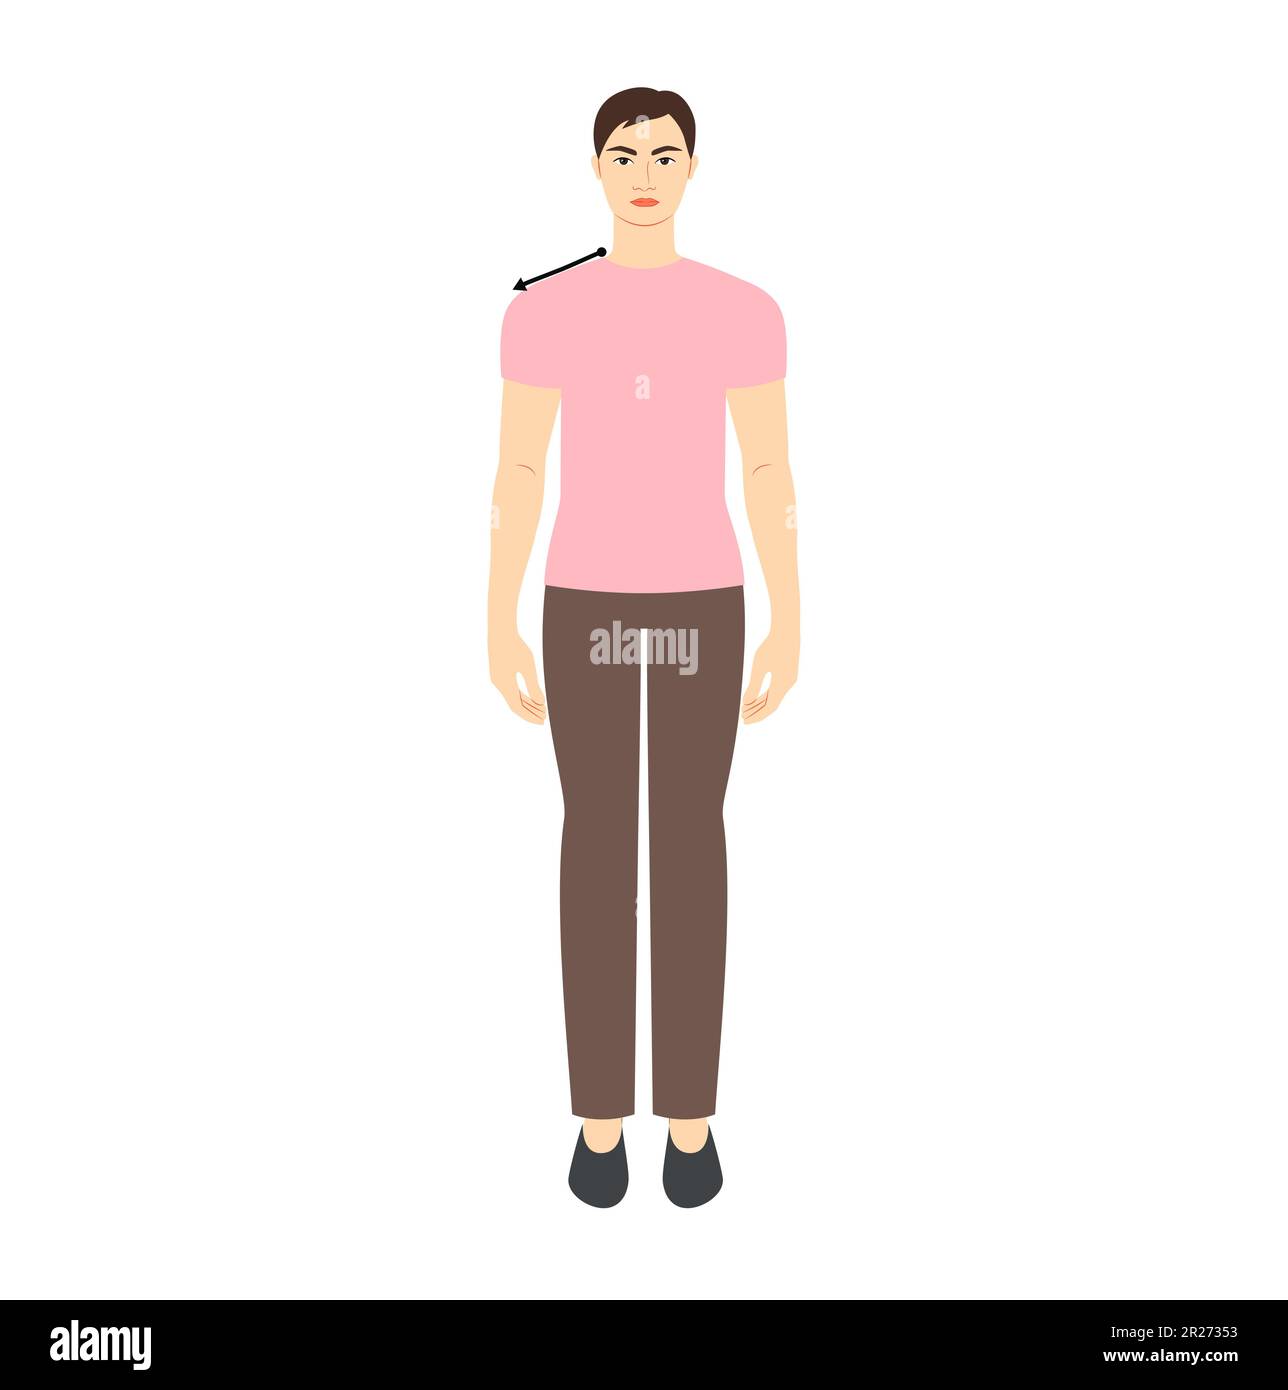 Men to do shoulder measurement body with arrows fashion Illustration for size chart. Flat male character front 8 head size boy in pink shirt. Human gentlemen infographic template for clothes Stock Vector